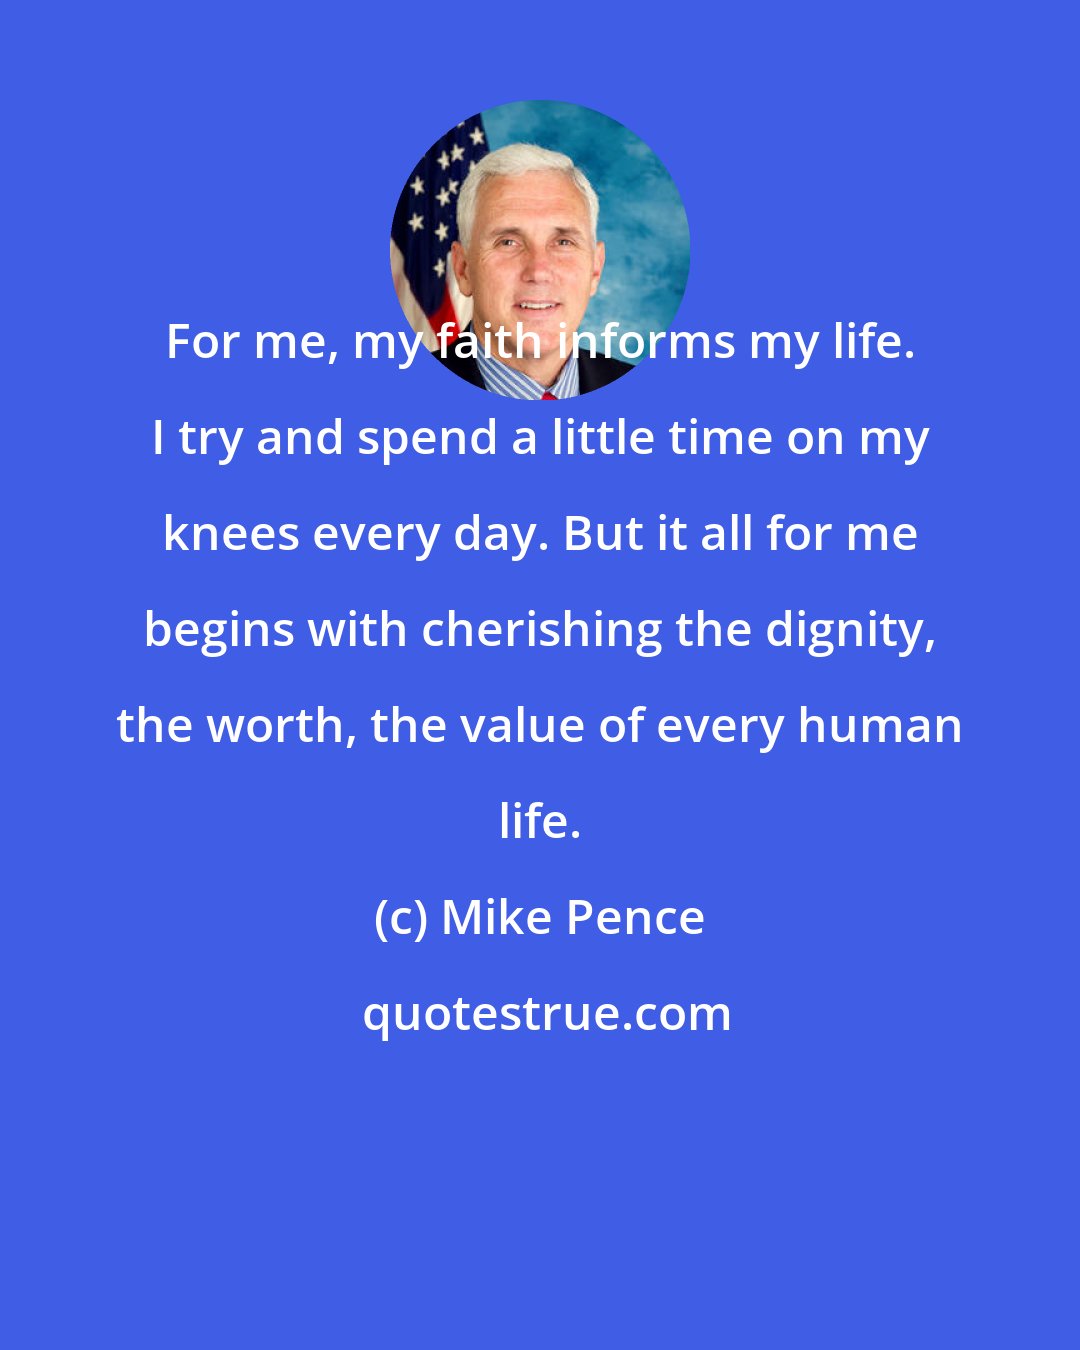 Mike Pence: For me, my faith informs my life. I try and spend a little time on my knees every day. But it all for me begins with cherishing the dignity, the worth, the value of every human life.